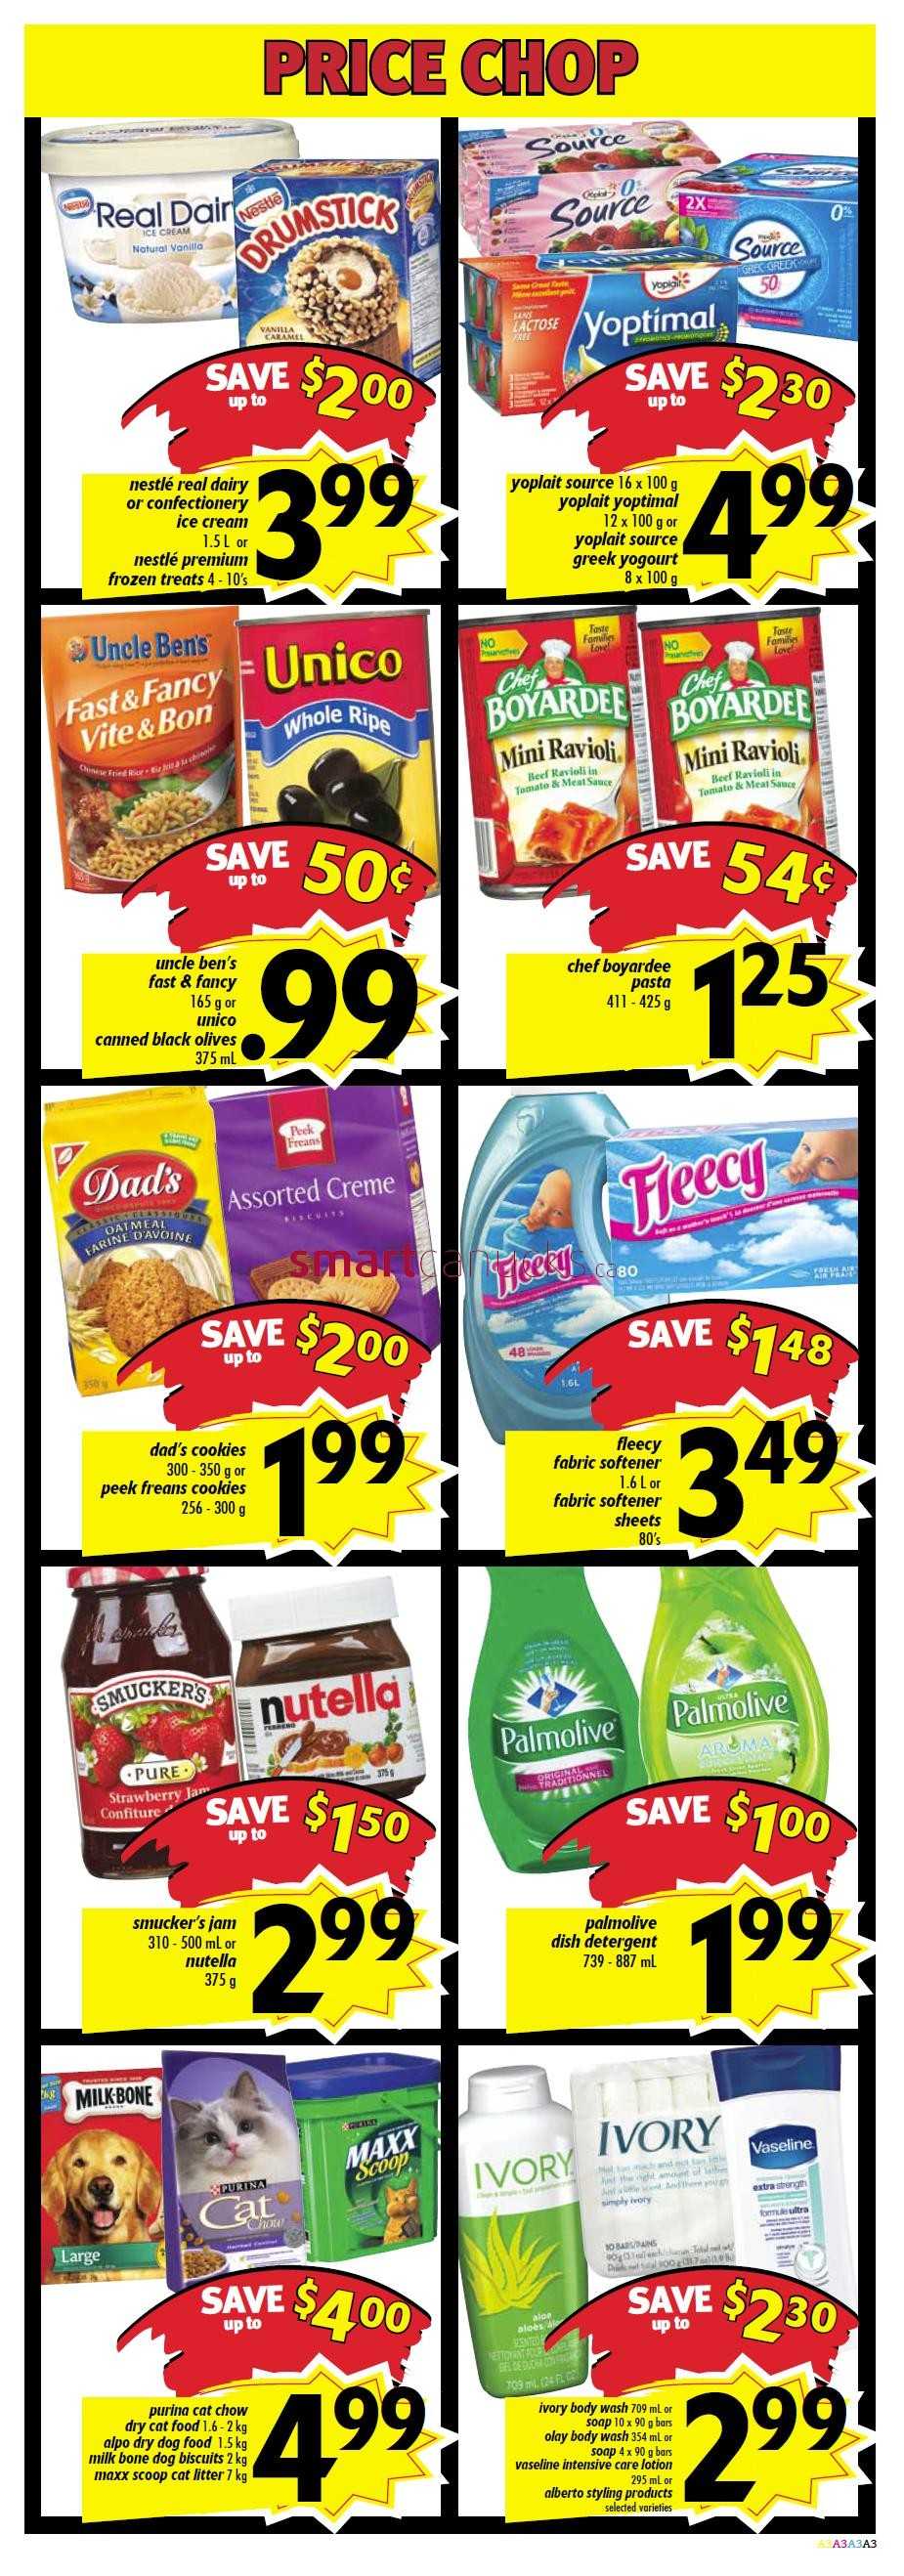 Price Chopper flyer February 27 to March 5